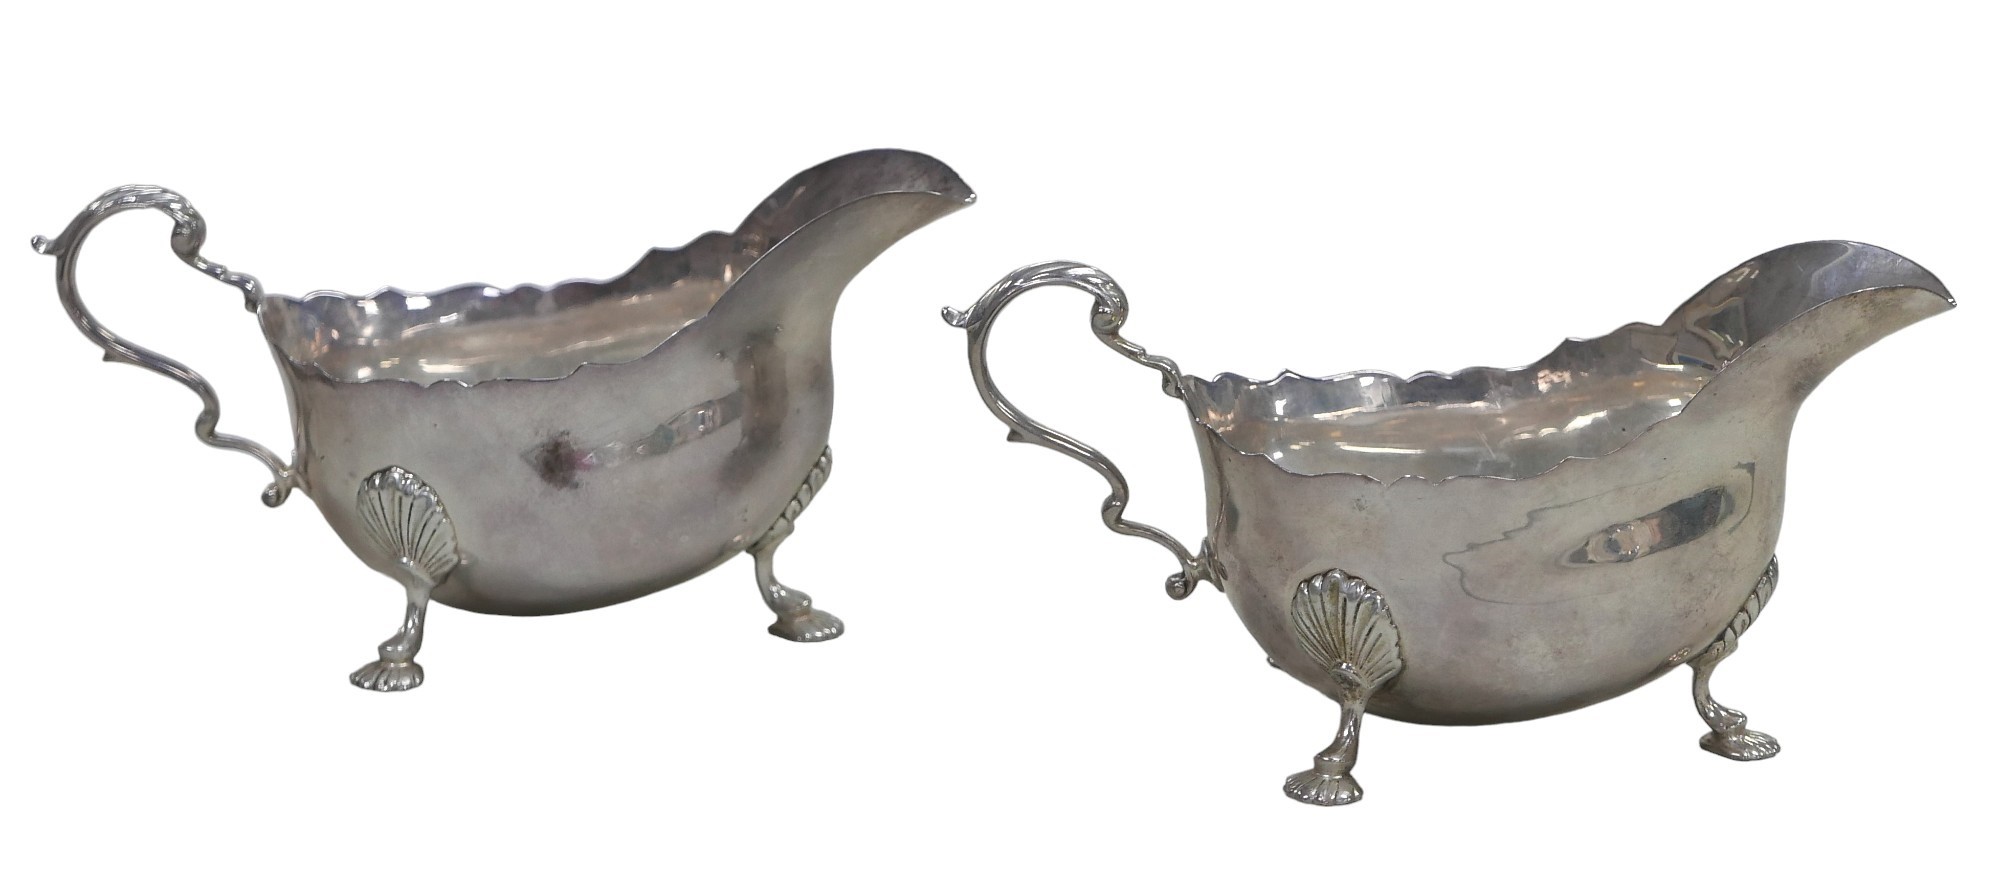 Two ERII silver sauce boats, Garrard & Co. Ltd. London, 1965, 12toz, 18 by 9 by 9cm high. (2)